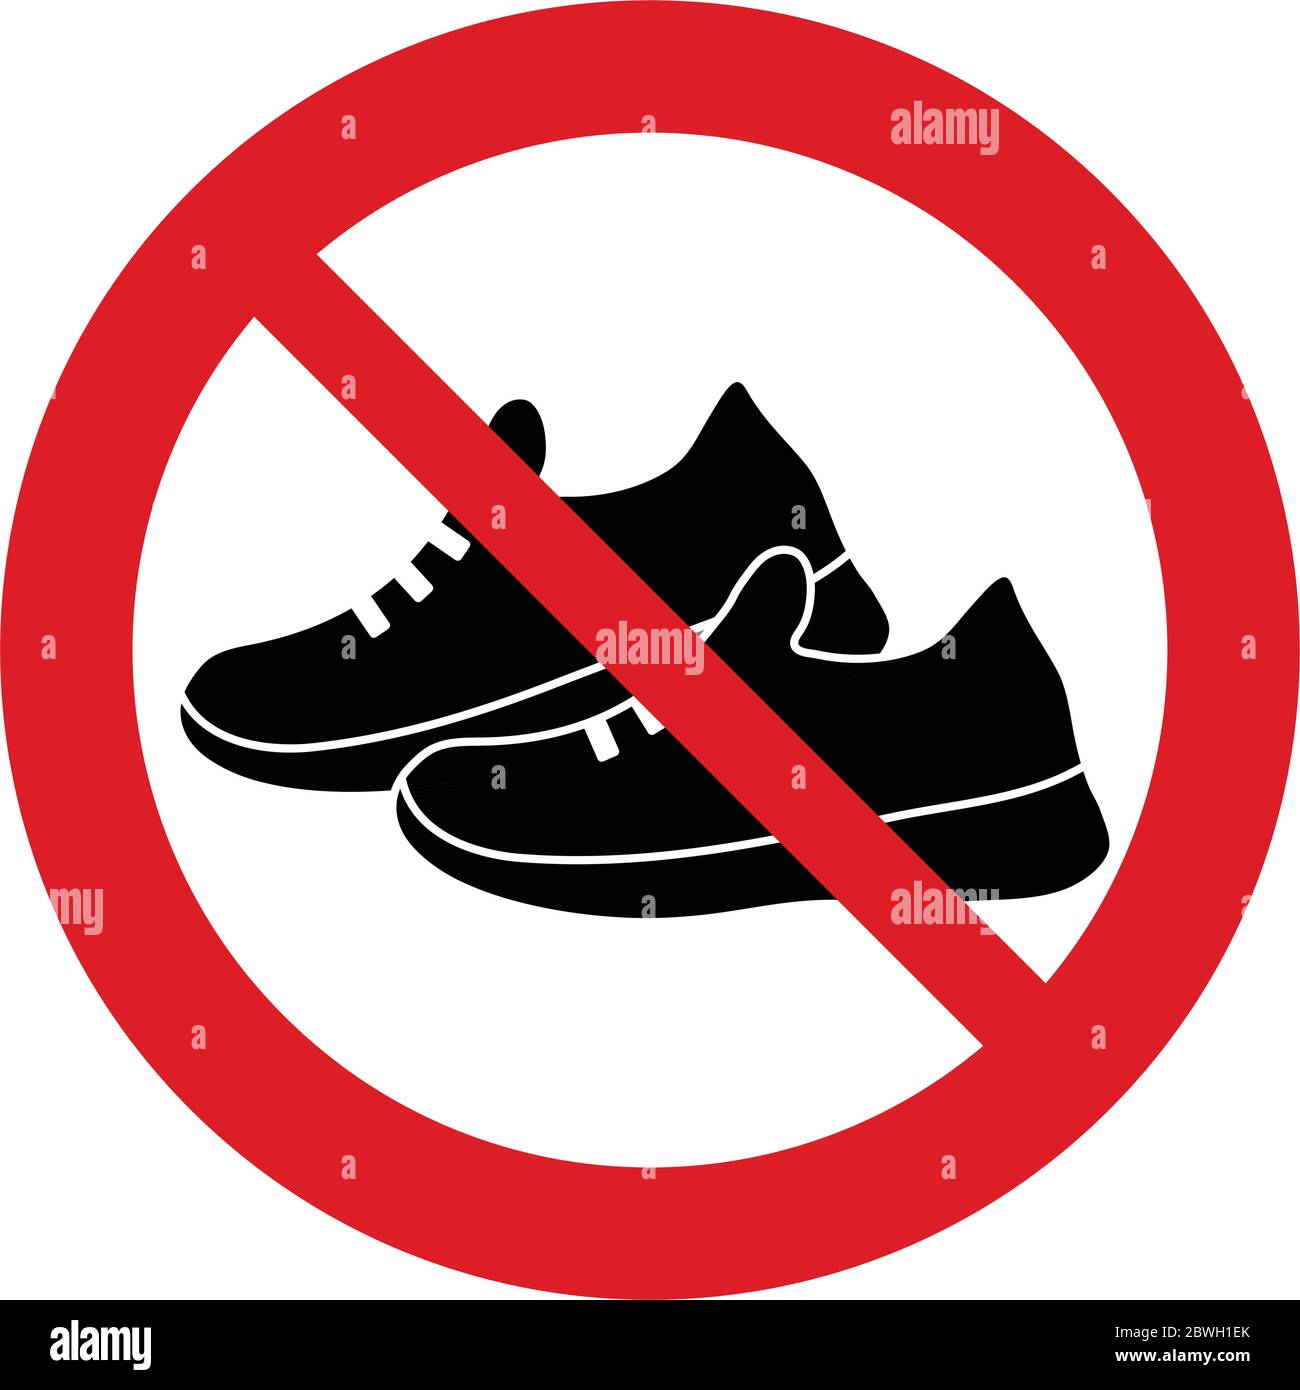 The worst running shoes you'd never want to wear | World Vision